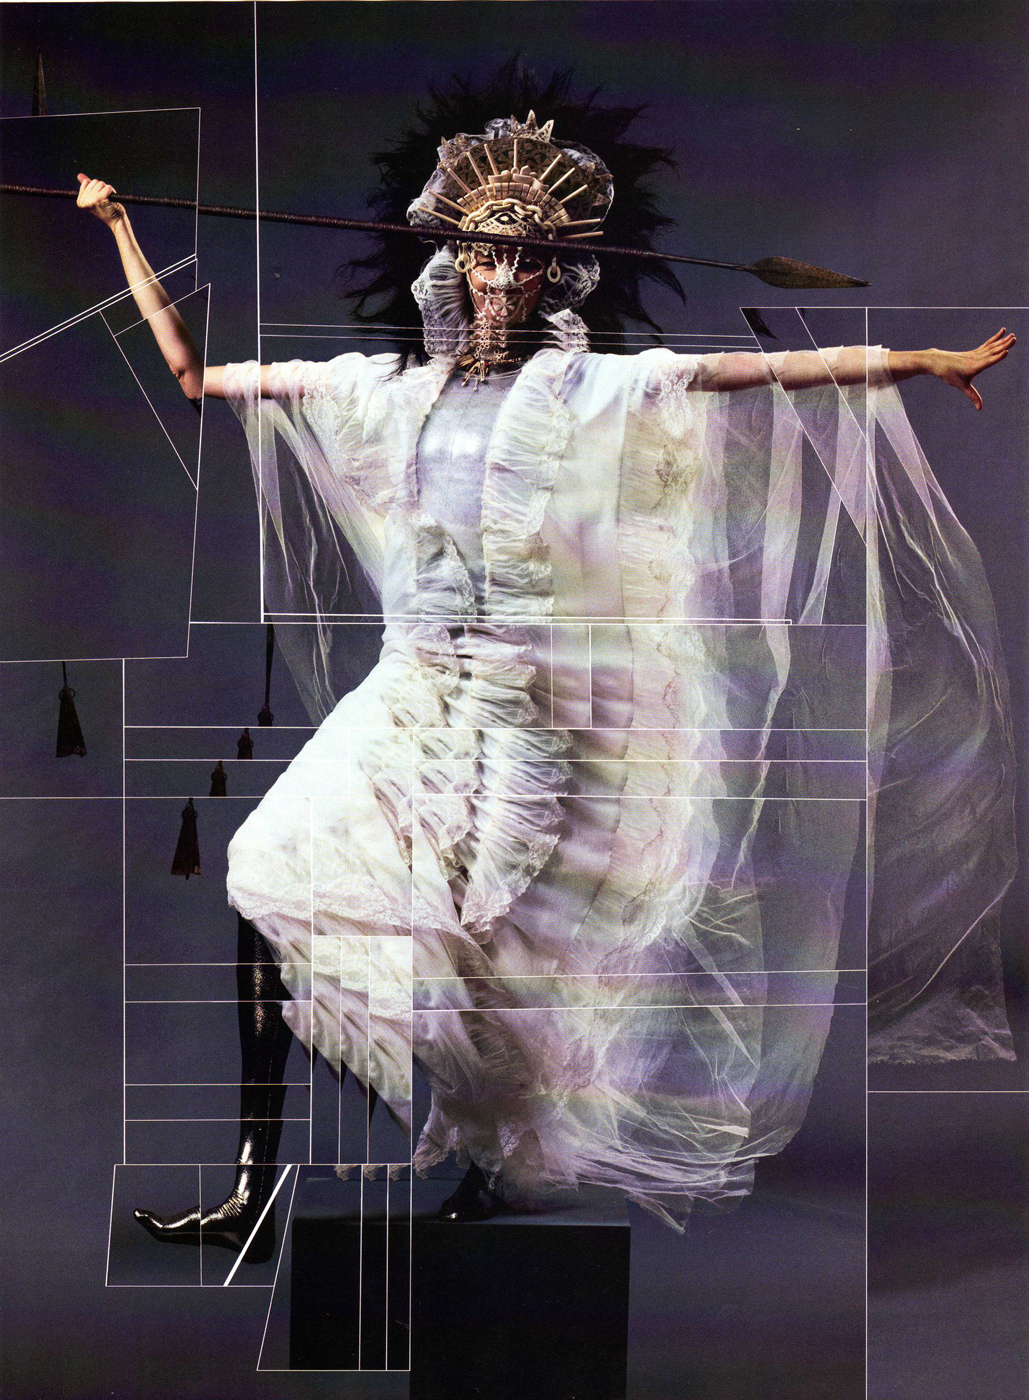 Inspirational Imagery: Bjork by Jean Paul Goude